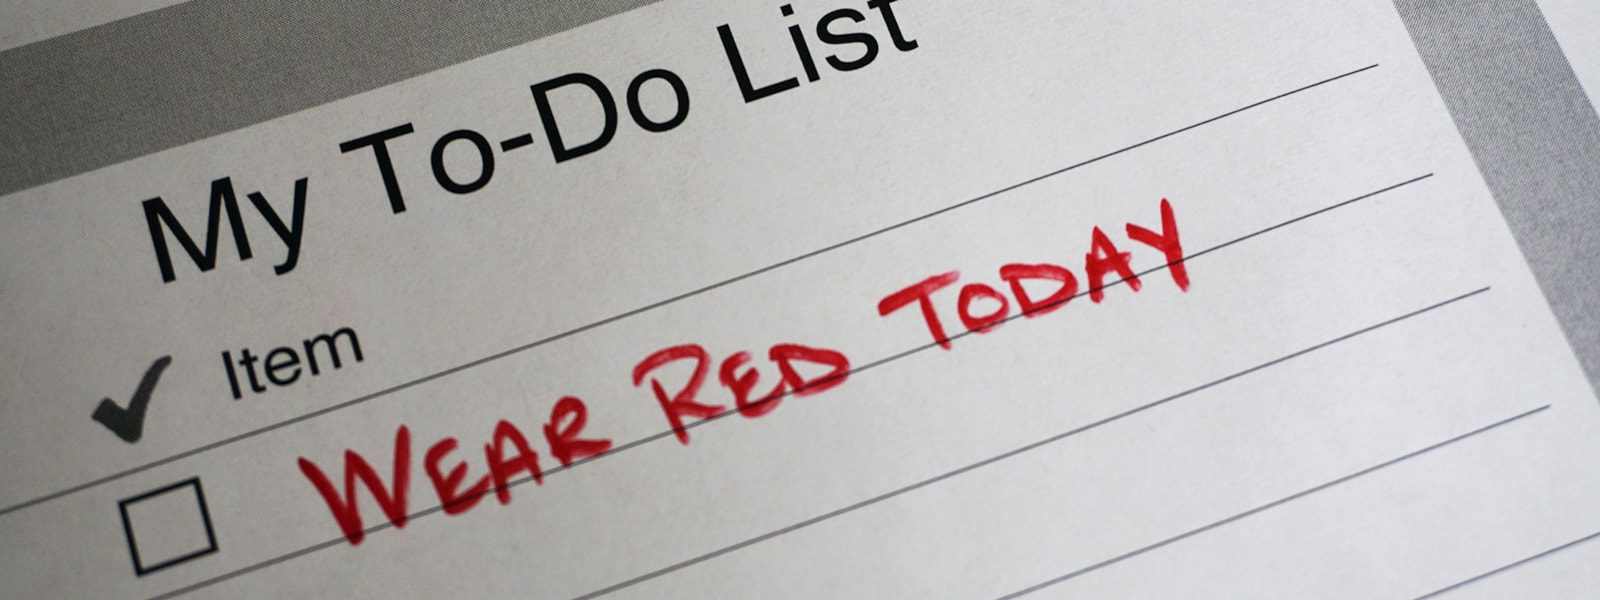 To-Do list with reminder to wear red today